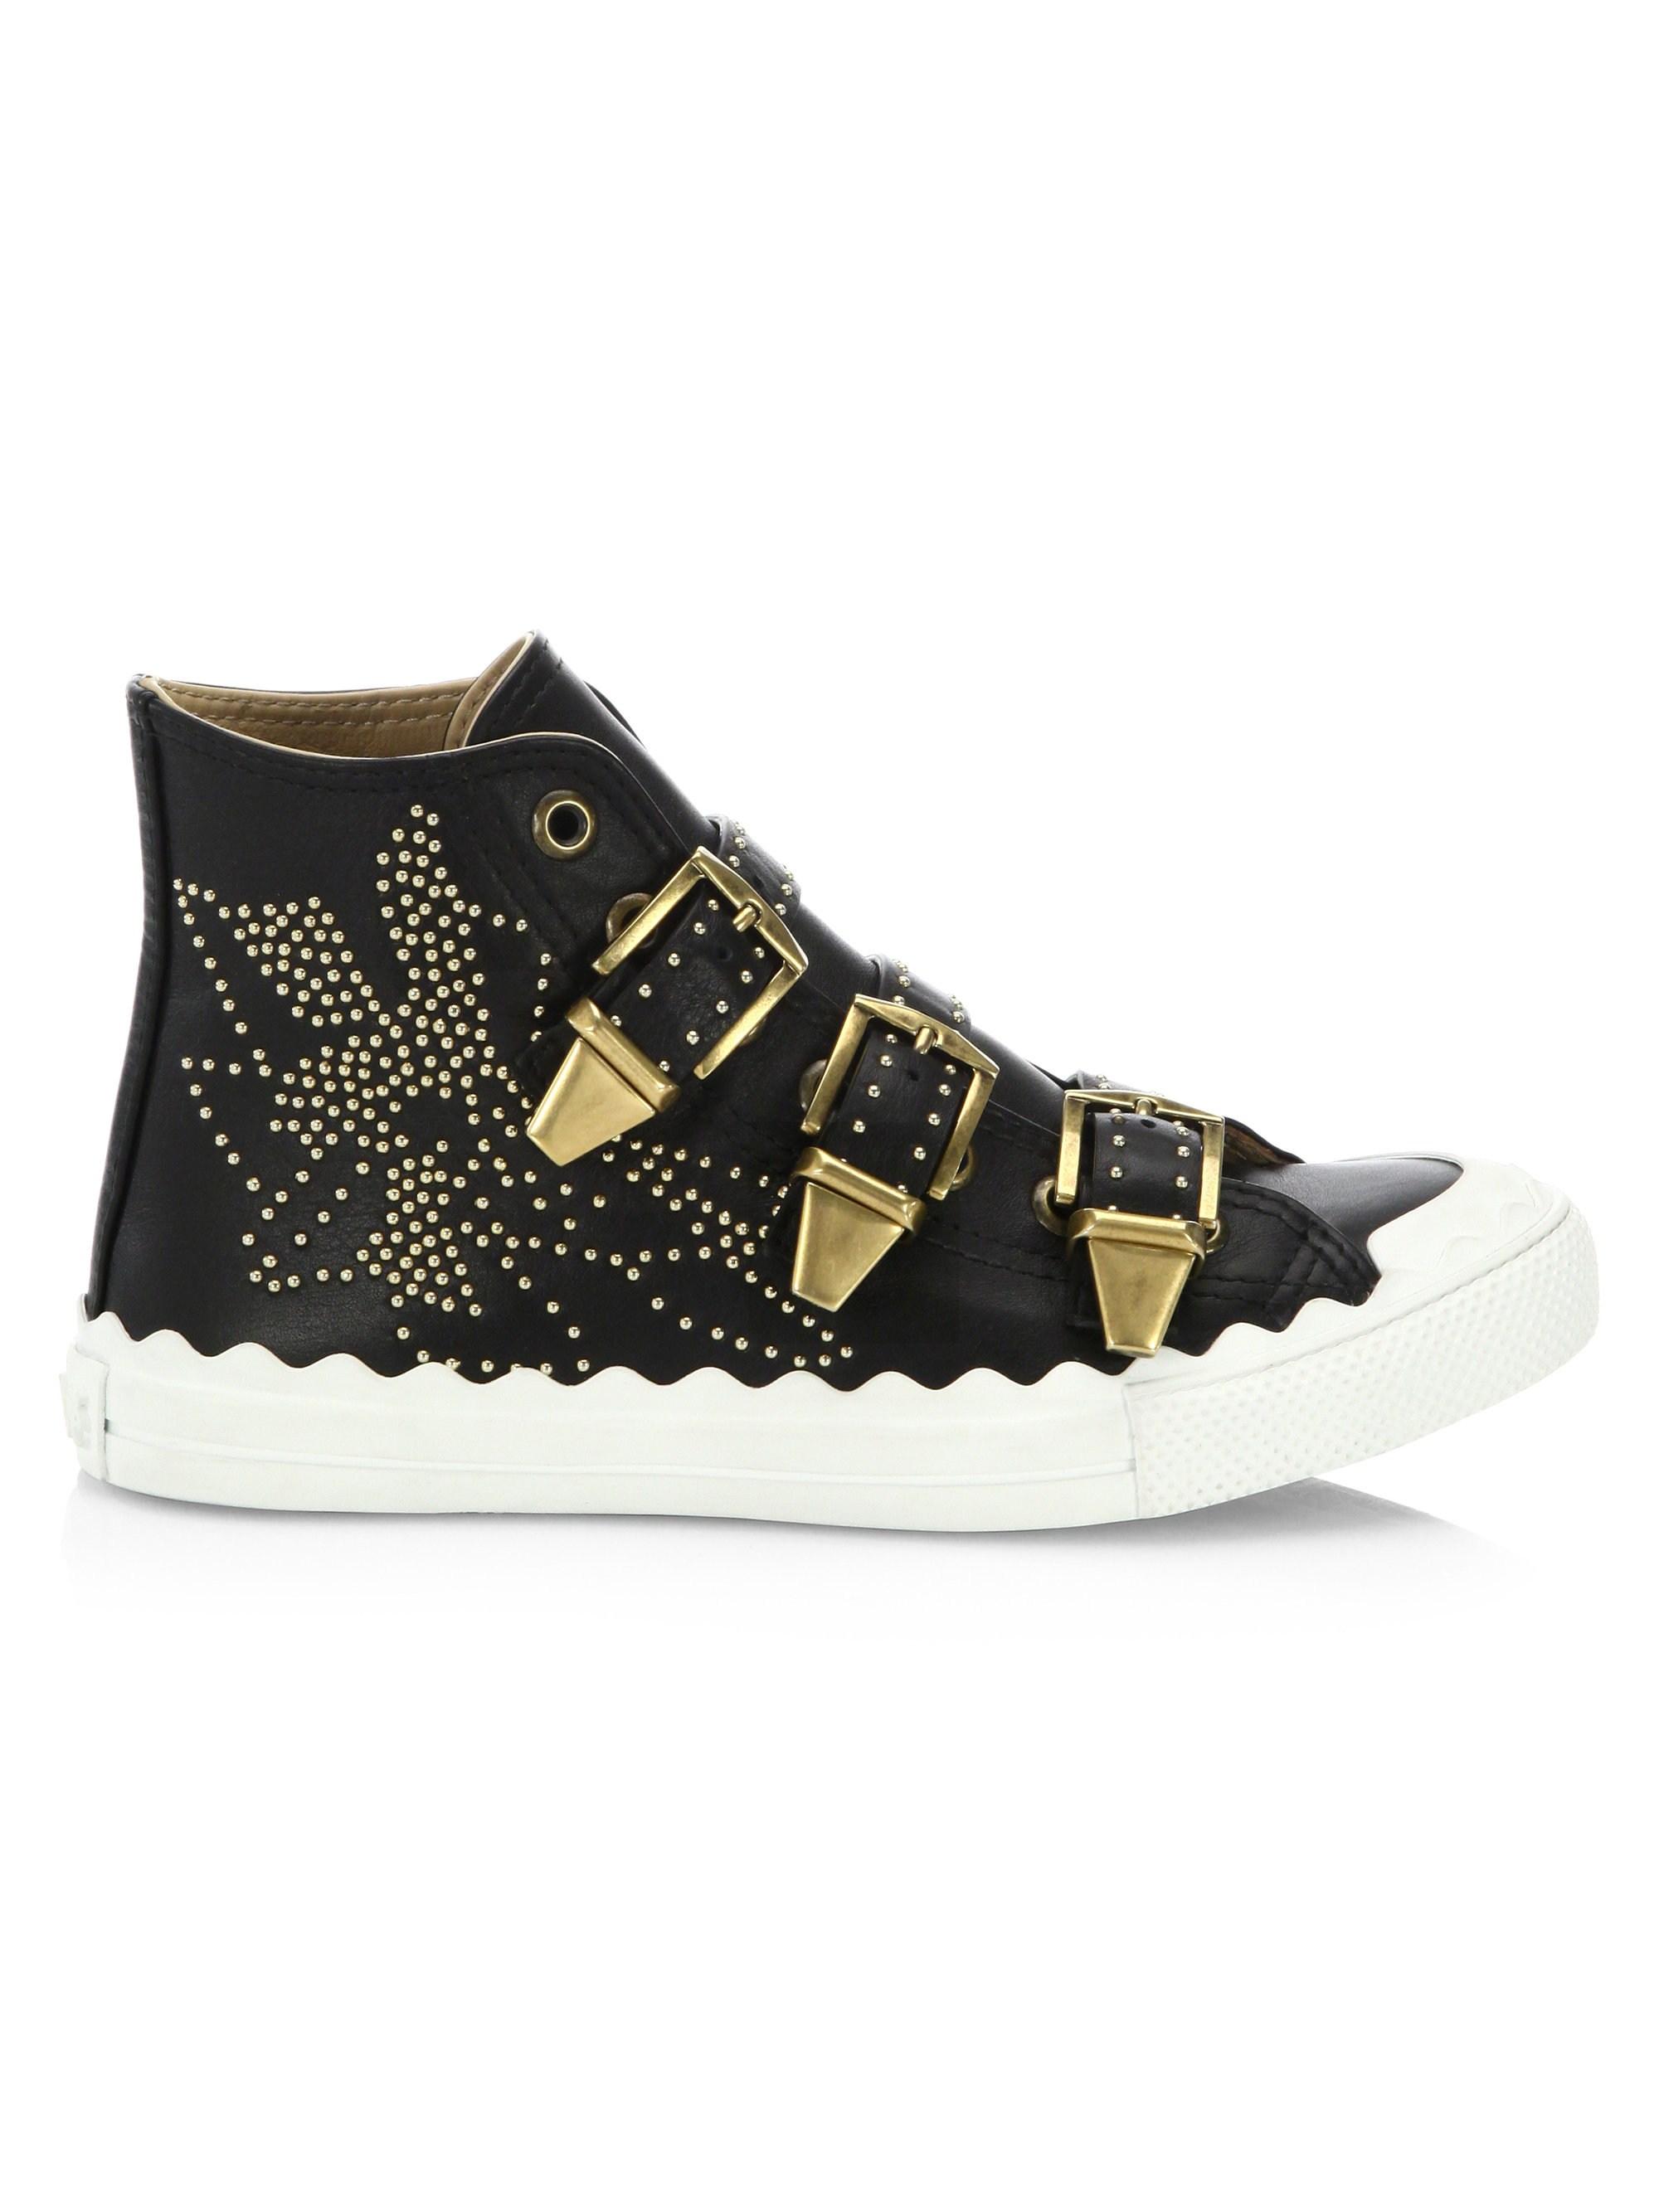 Chloé Sneakers Susanna High Leather Black Rivets Gold Floral | Lyst